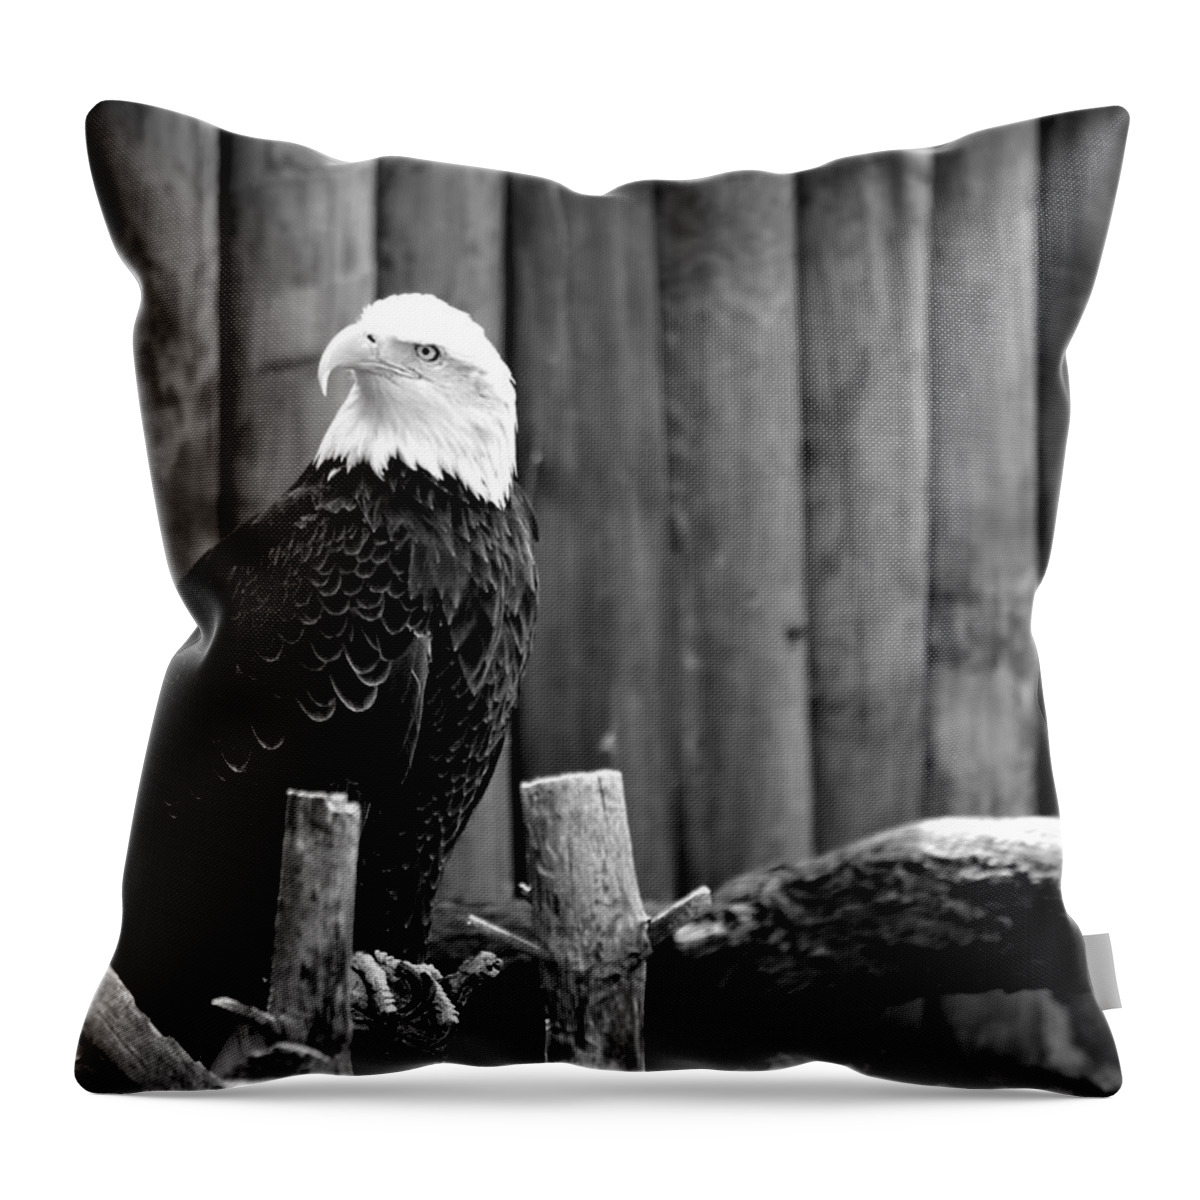 Eagle Throw Pillow featuring the photograph Bald Eagle by Deena Stoddard